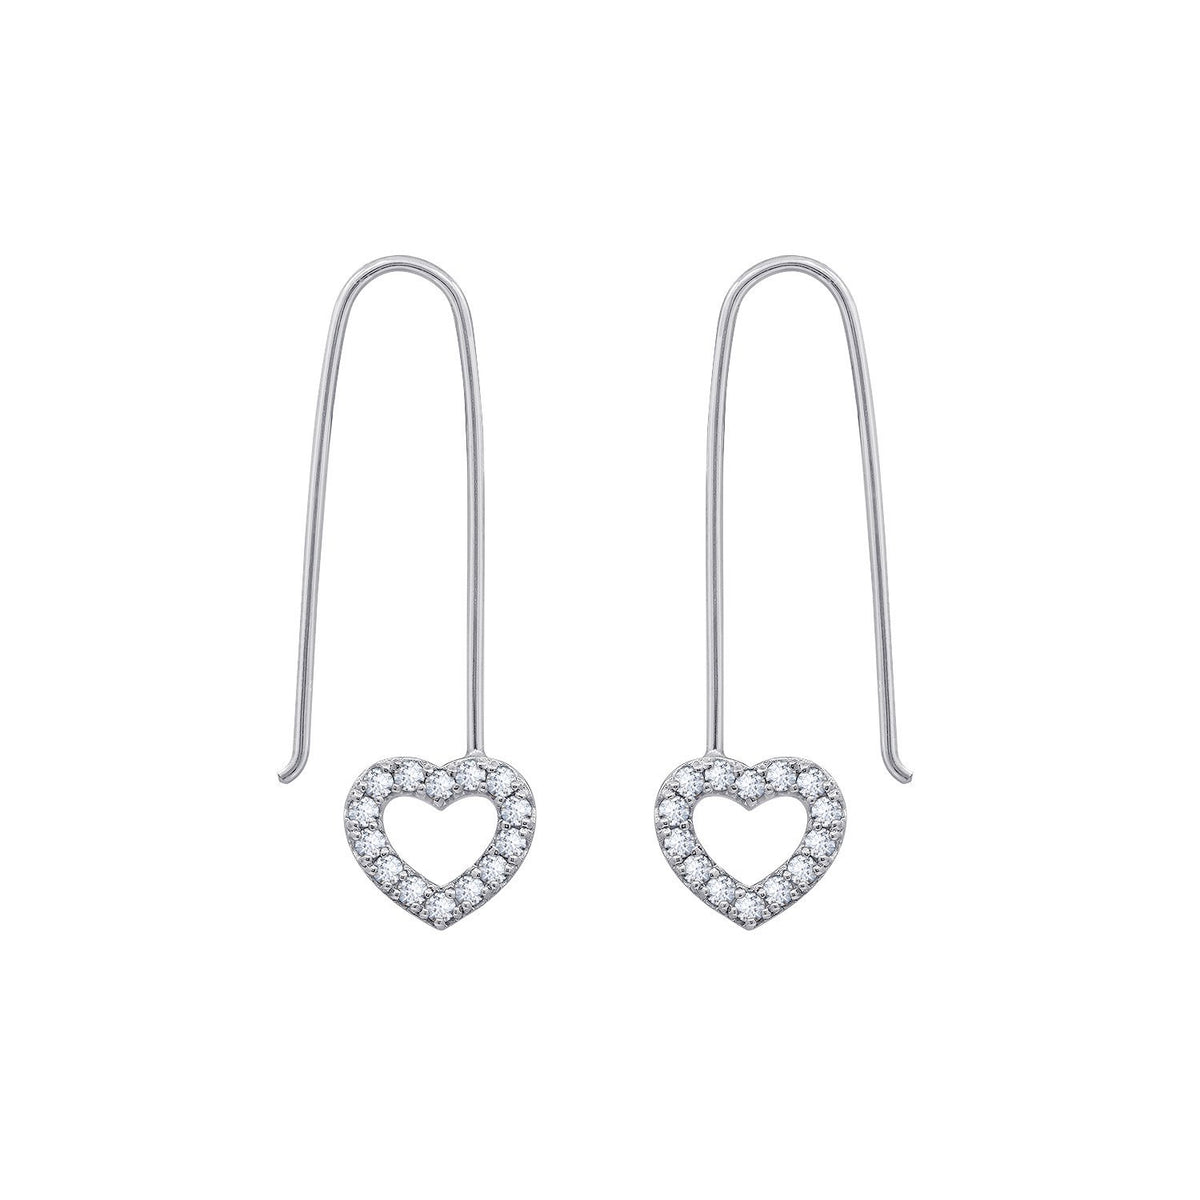 GEMOUR 14K Gold or Rhodium Clad Sterling Silver 0.5 cttw Cubic Zirconia Pave Heart Dangle Oval Hoop Earrings - GEMOUR